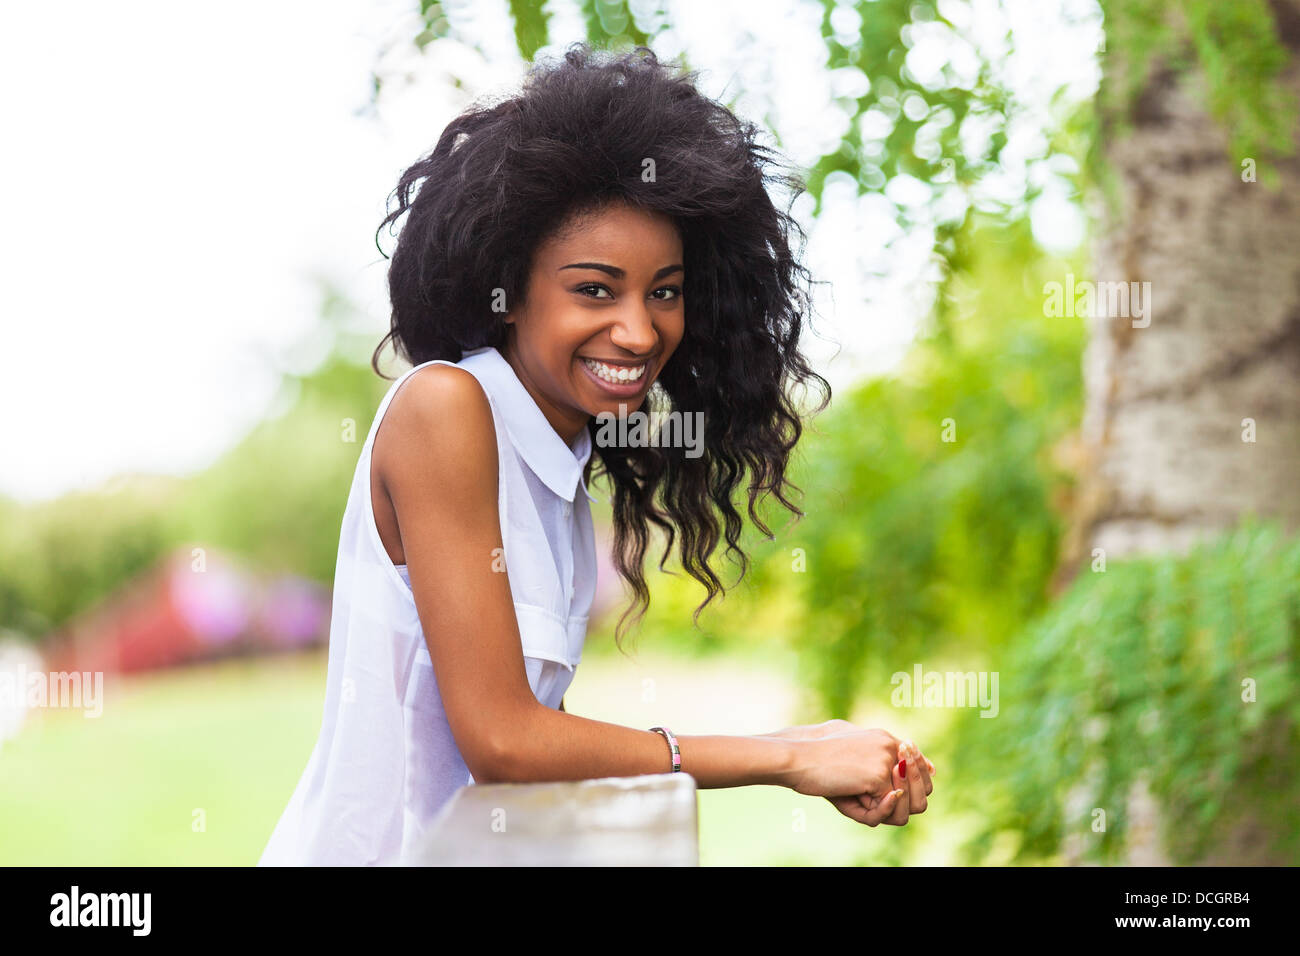 Outdoor portrait of a smiling teenage black girl - African people Stock Photo